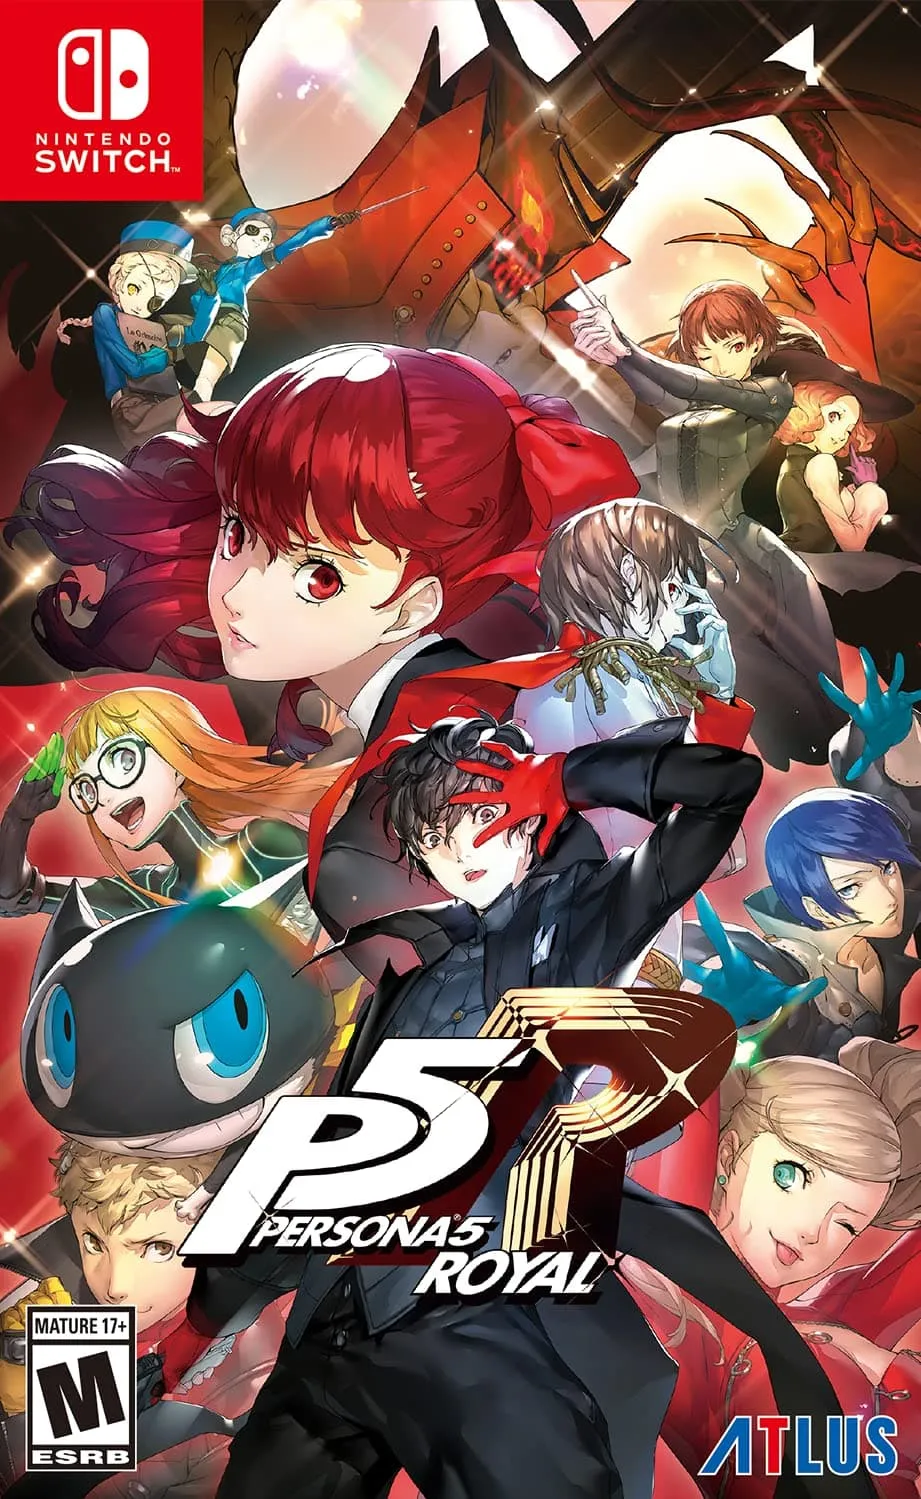 Persona 5 Royal for Nintendo Switch.